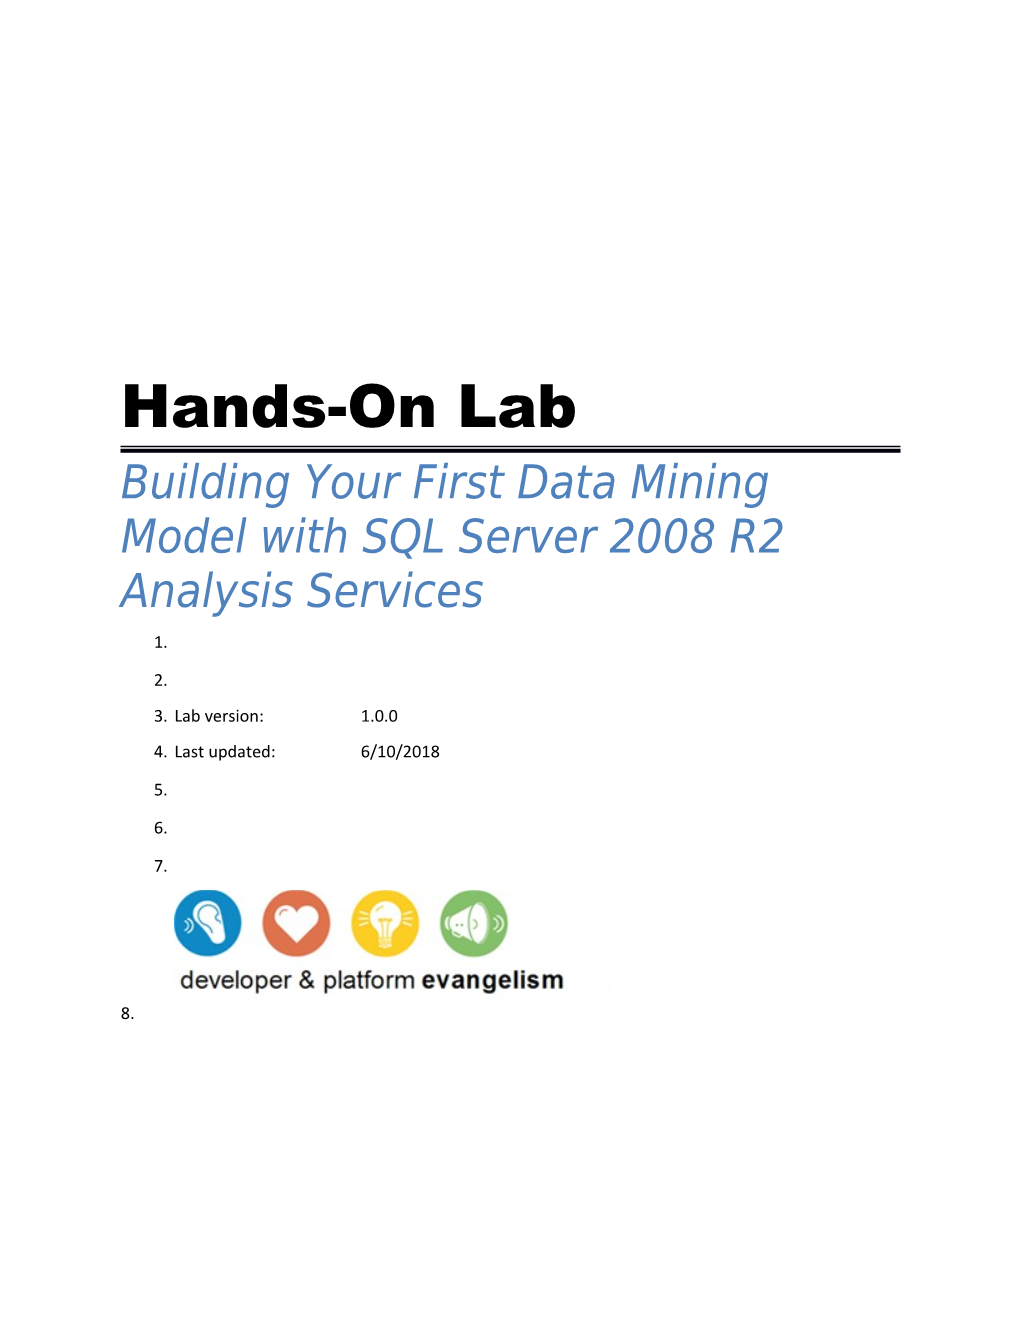 Hands on Lab: Building Your First Data Mining Model with SQL Server 2008 R2 Analysis Services